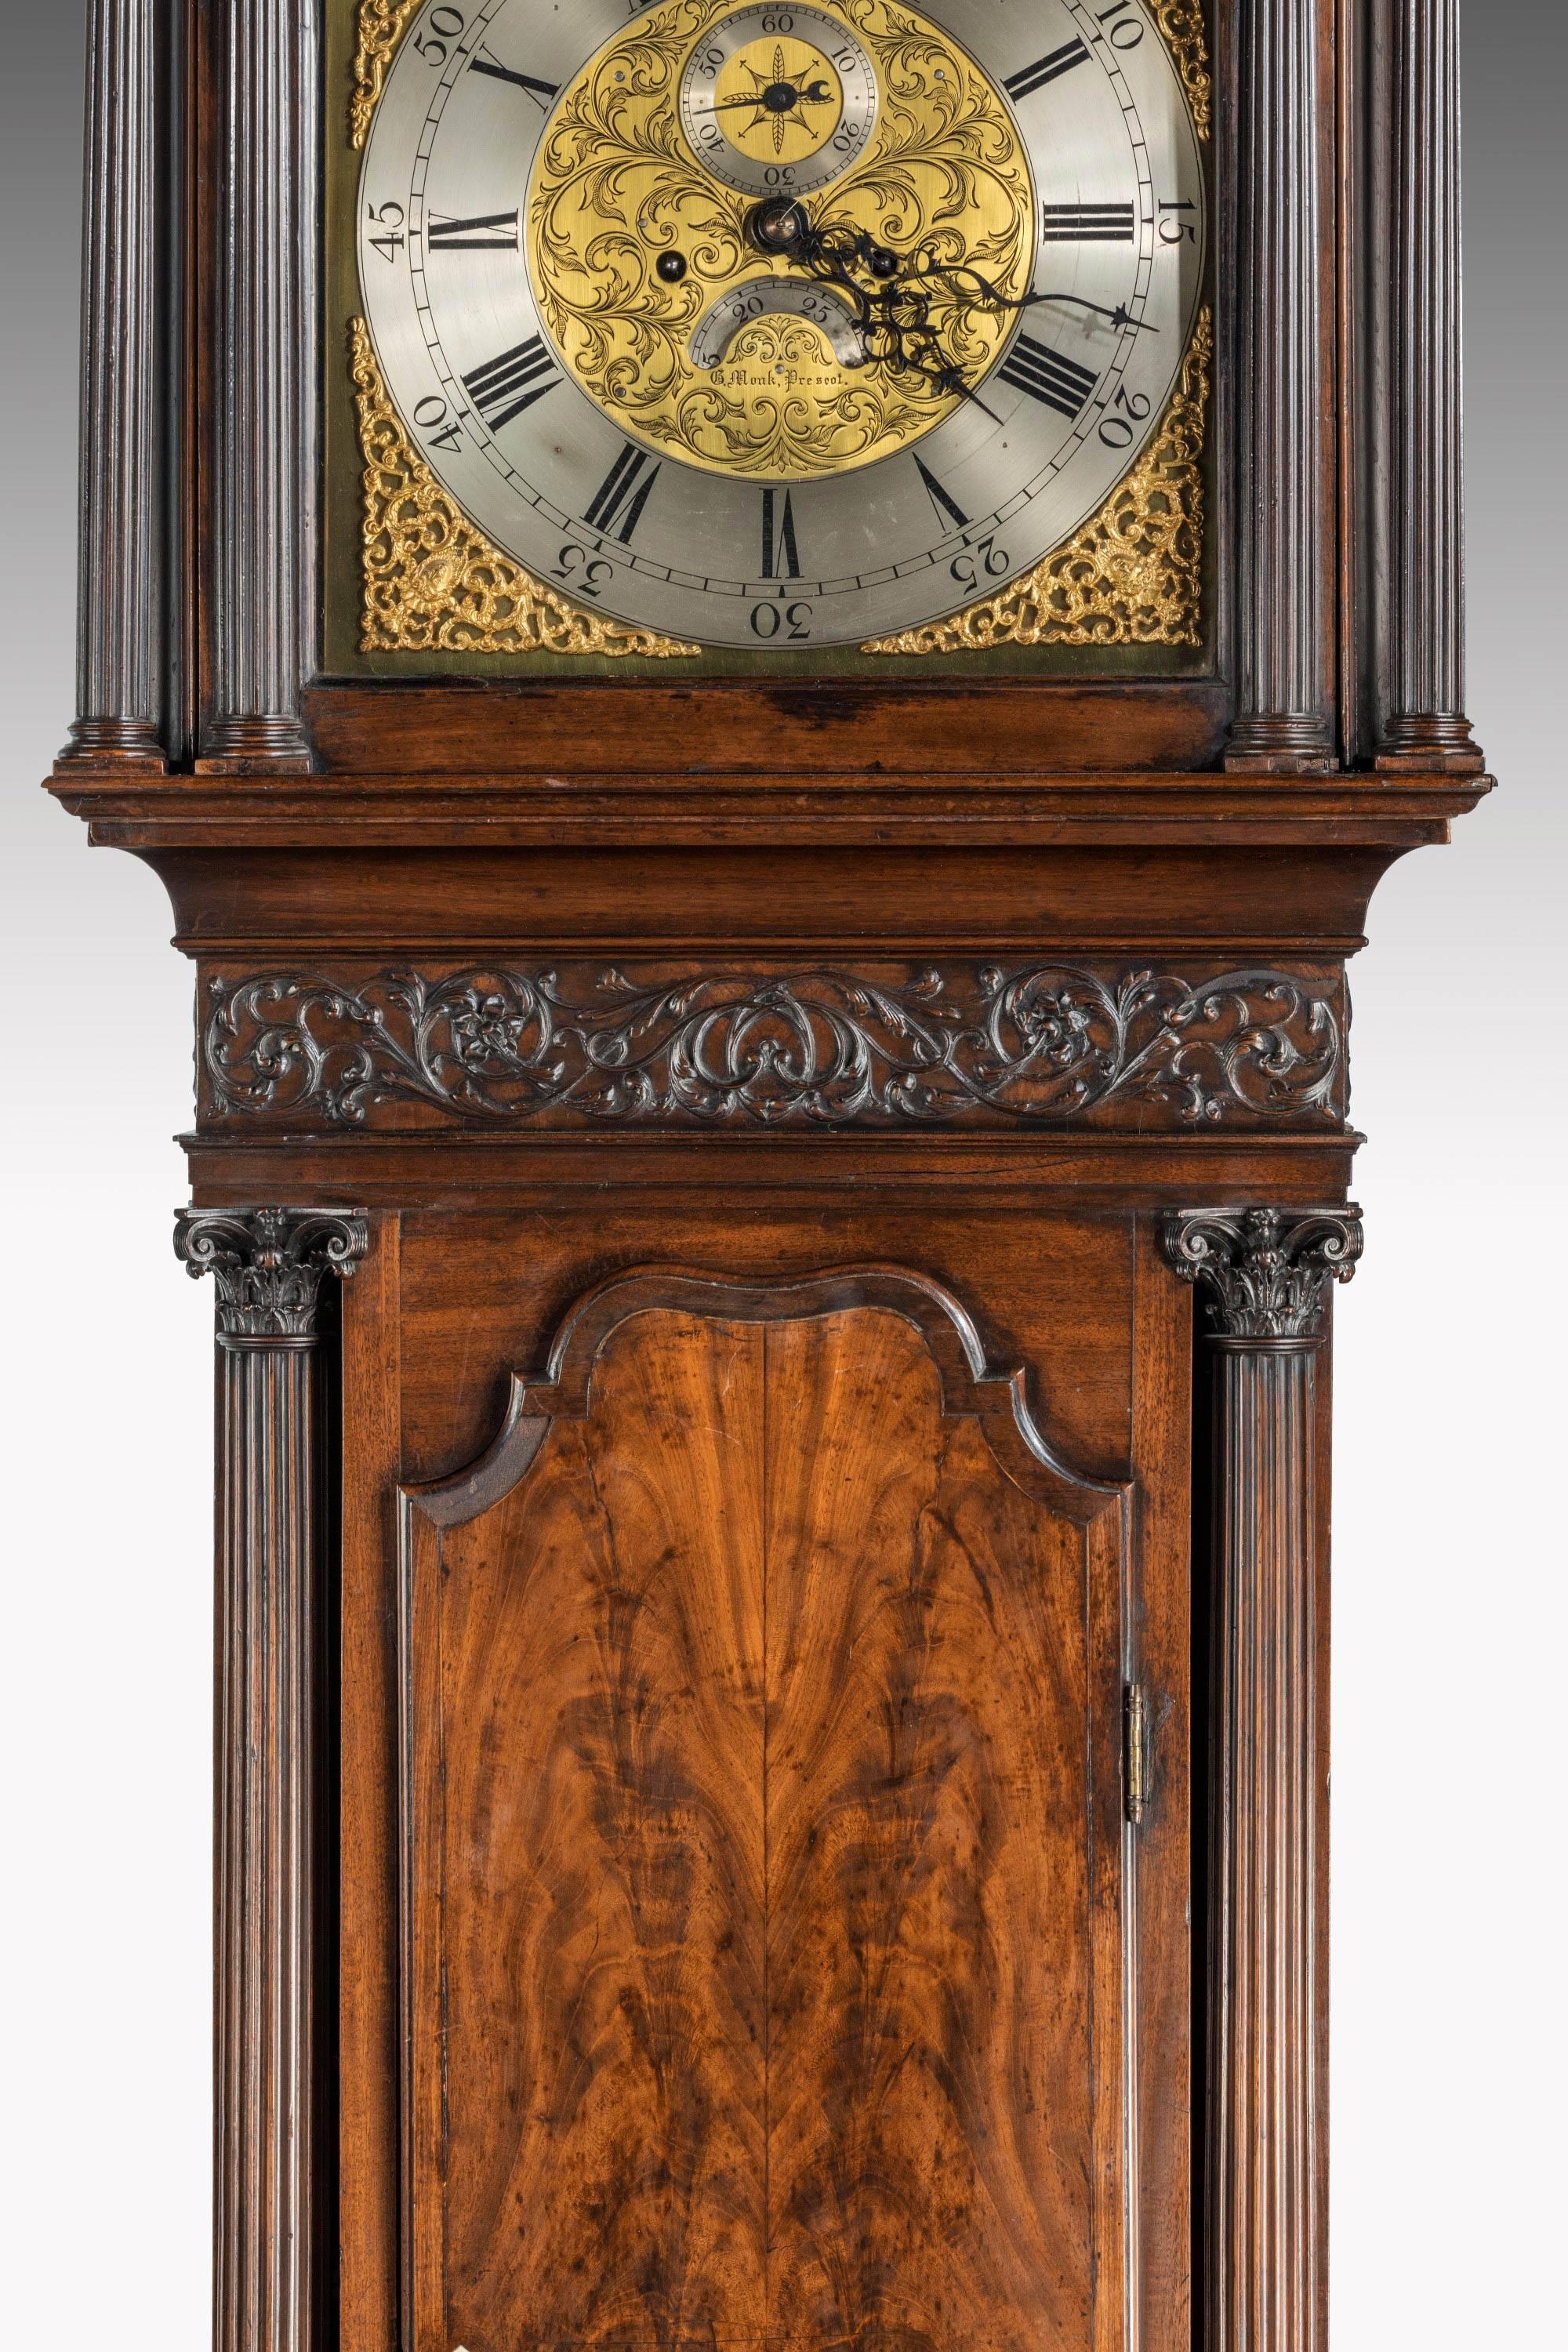 George III Period Carved Mahogany Longcase Clock by George Monk of Prescot In Excellent Condition In Peterborough, Northamptonshire